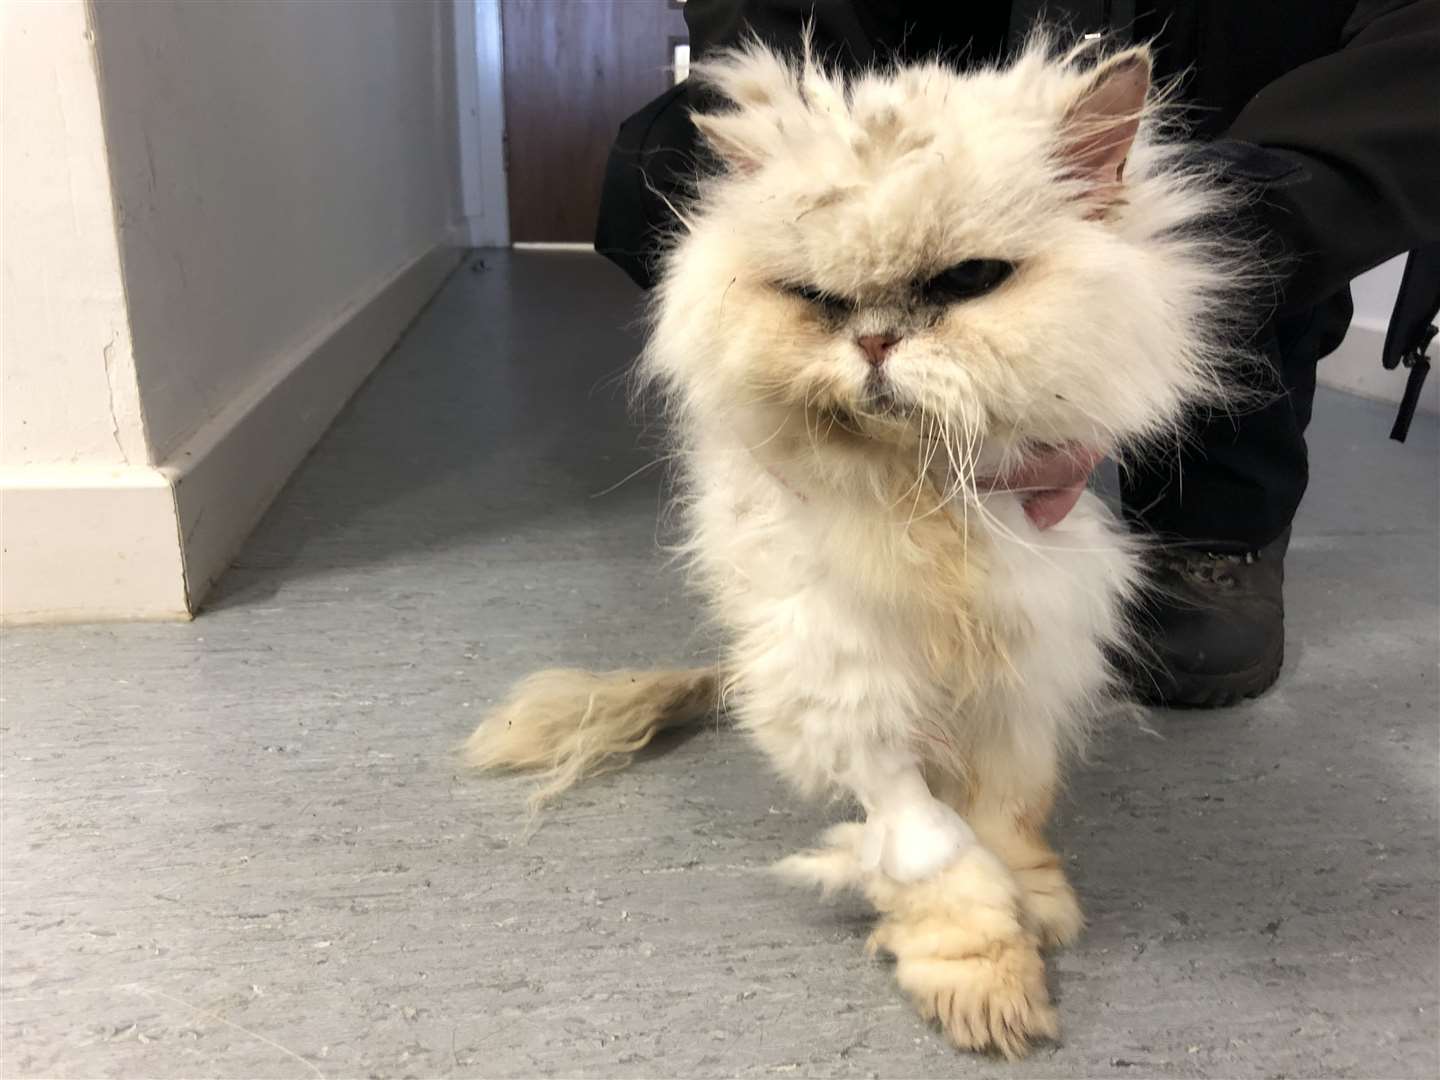 The Persian cat was in a bad way when she arrived at the animal welfare charity's centre.